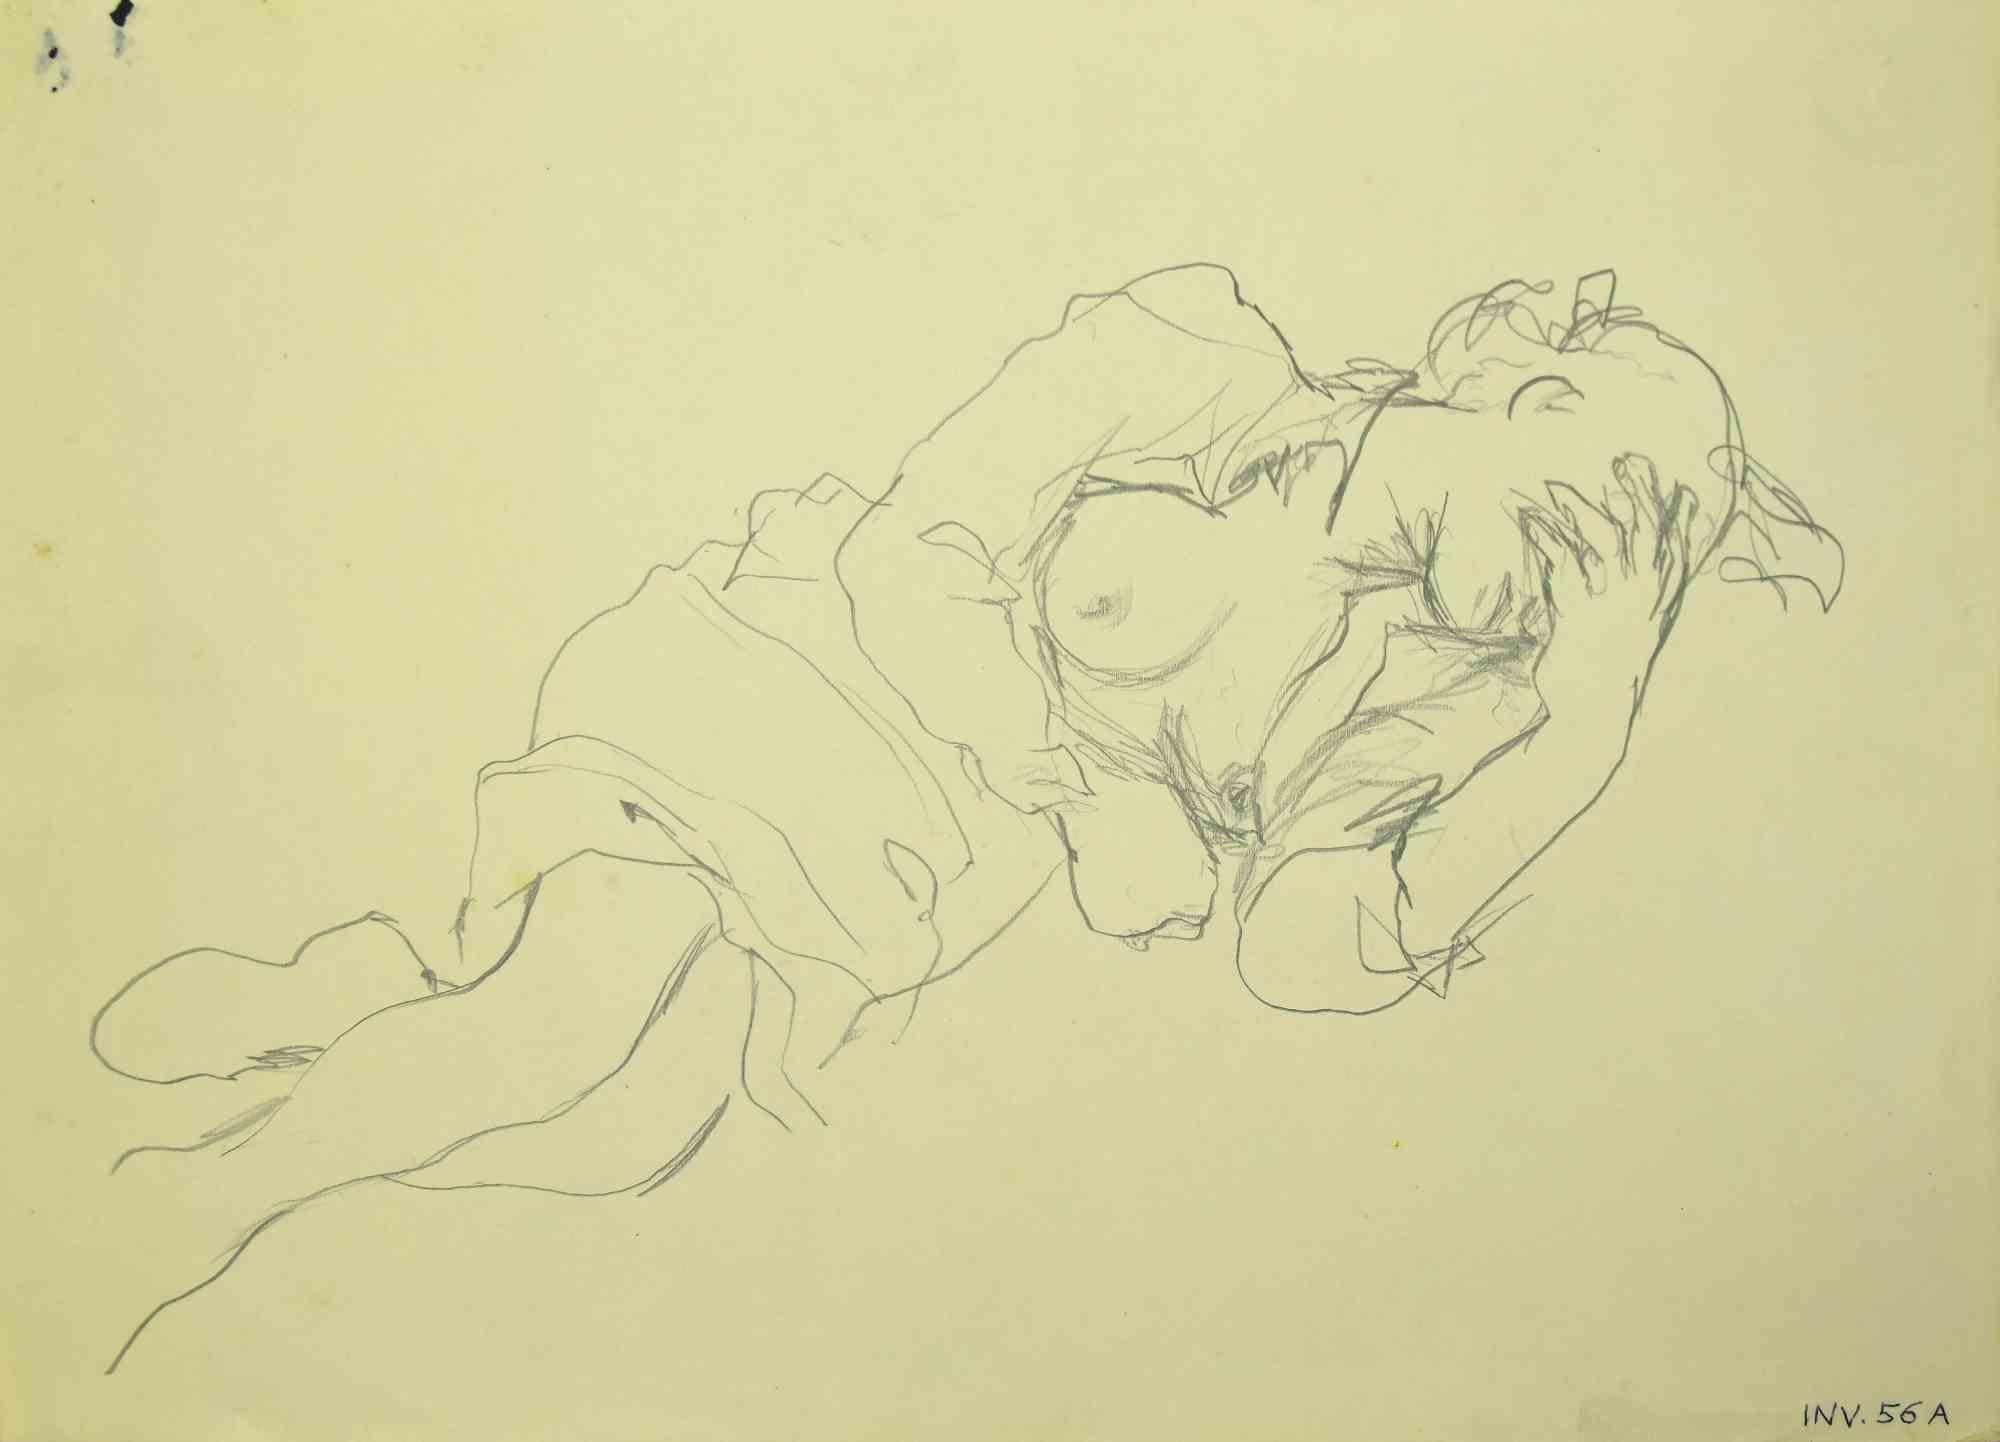 Reclined Woman is an original drawing in pencil on paper realized by Leo Guida in the 1970s.

Good condition.

Leo Guida  (1992 - 2017). Sensitive to current issues, artistic movements and historical techniques, Leo Guida has been able to weave with